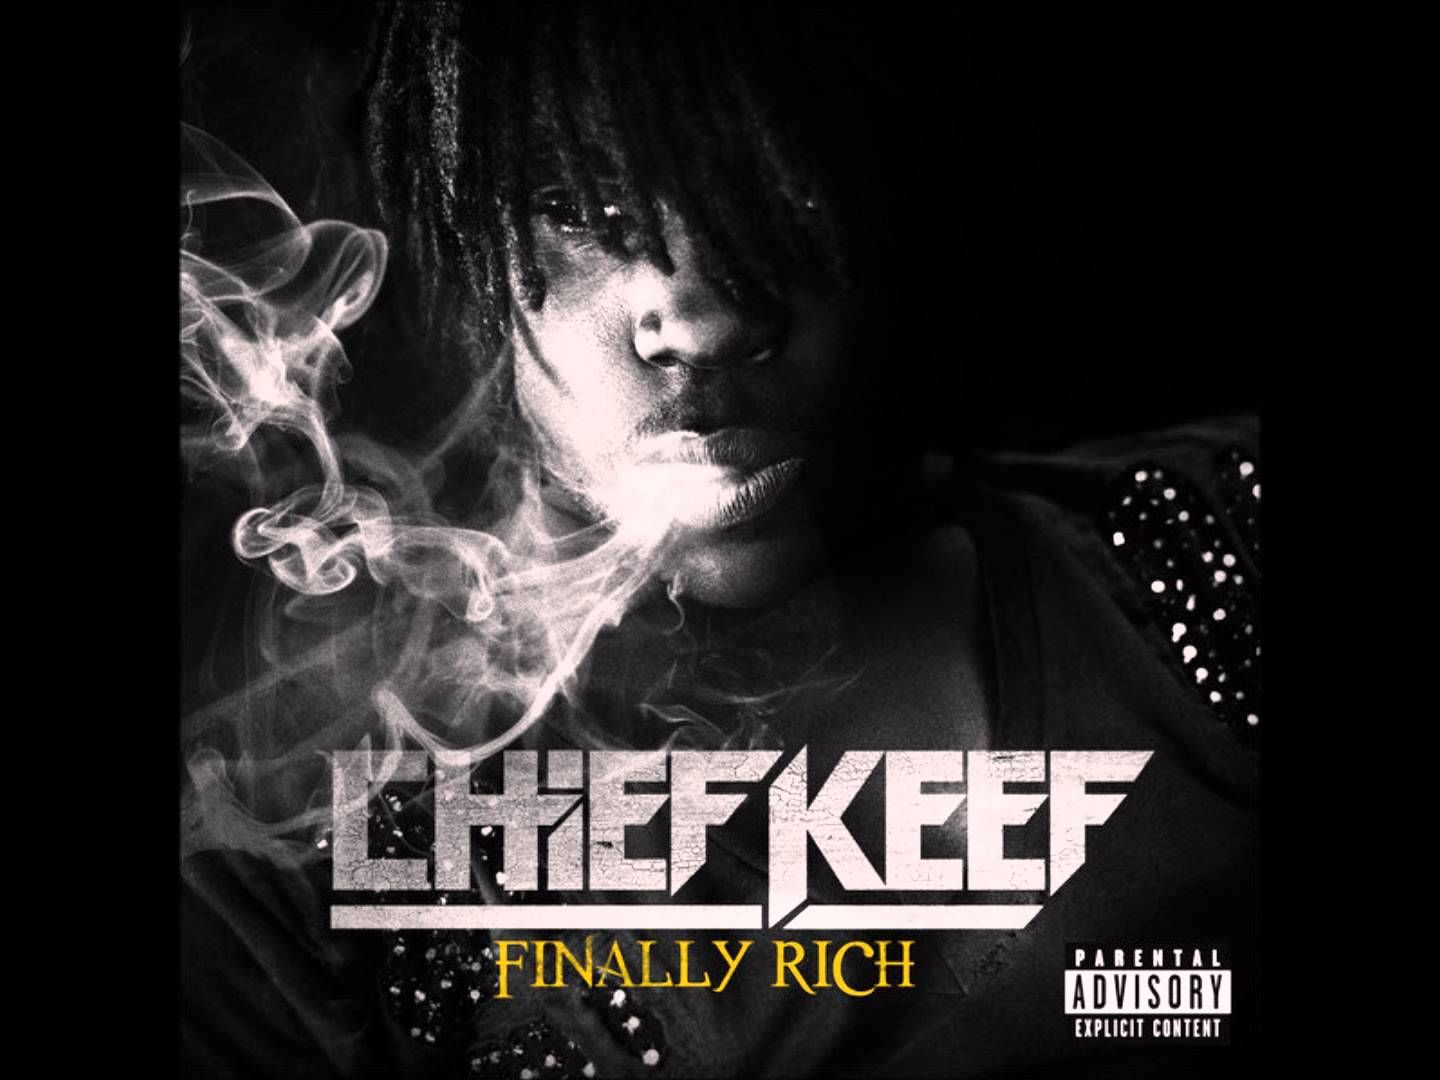 How is Chief Keef so rich?